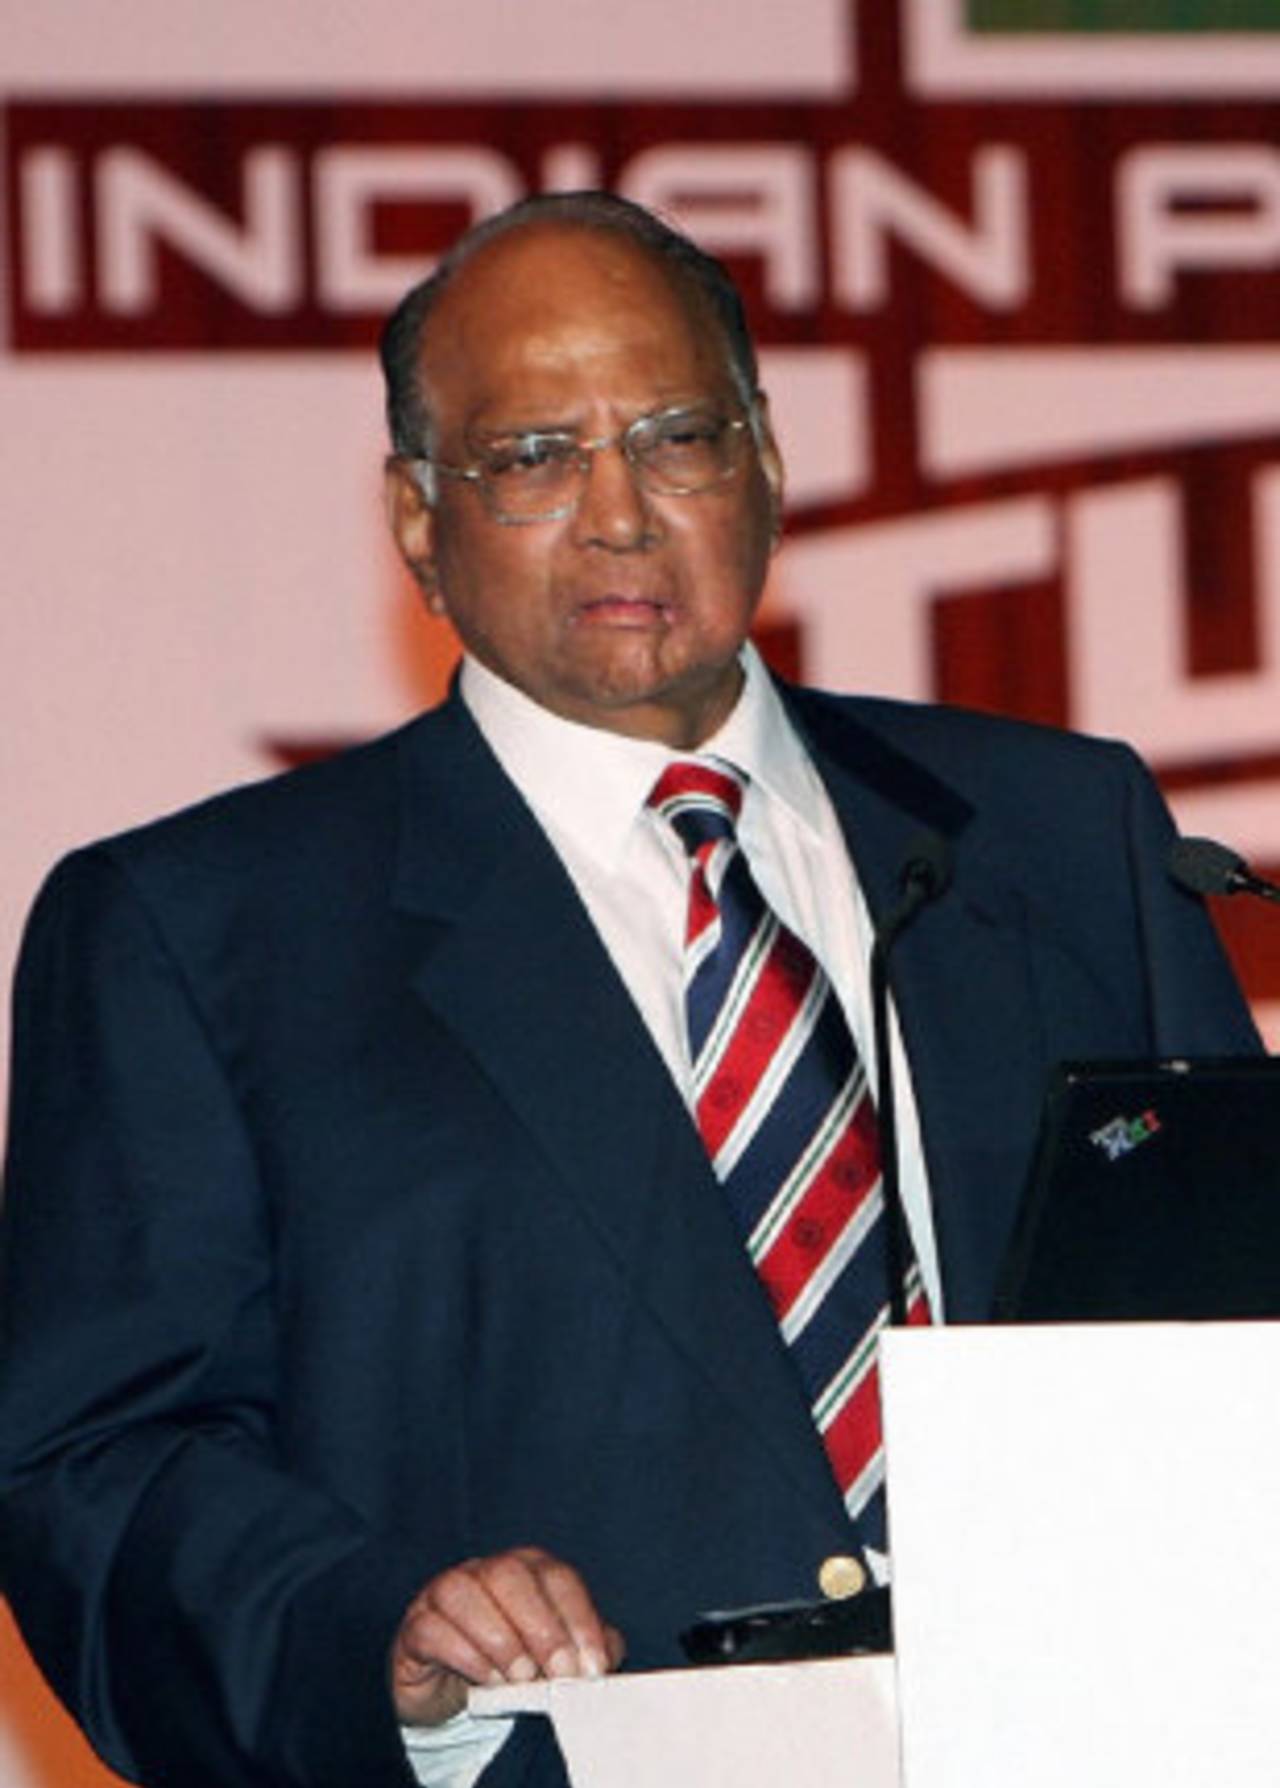 Sharad Pawar: "I am sure we can reach a decision which will be unanimously supported by the ICC Board"&nbsp;&nbsp;&bull;&nbsp;&nbsp;AFP